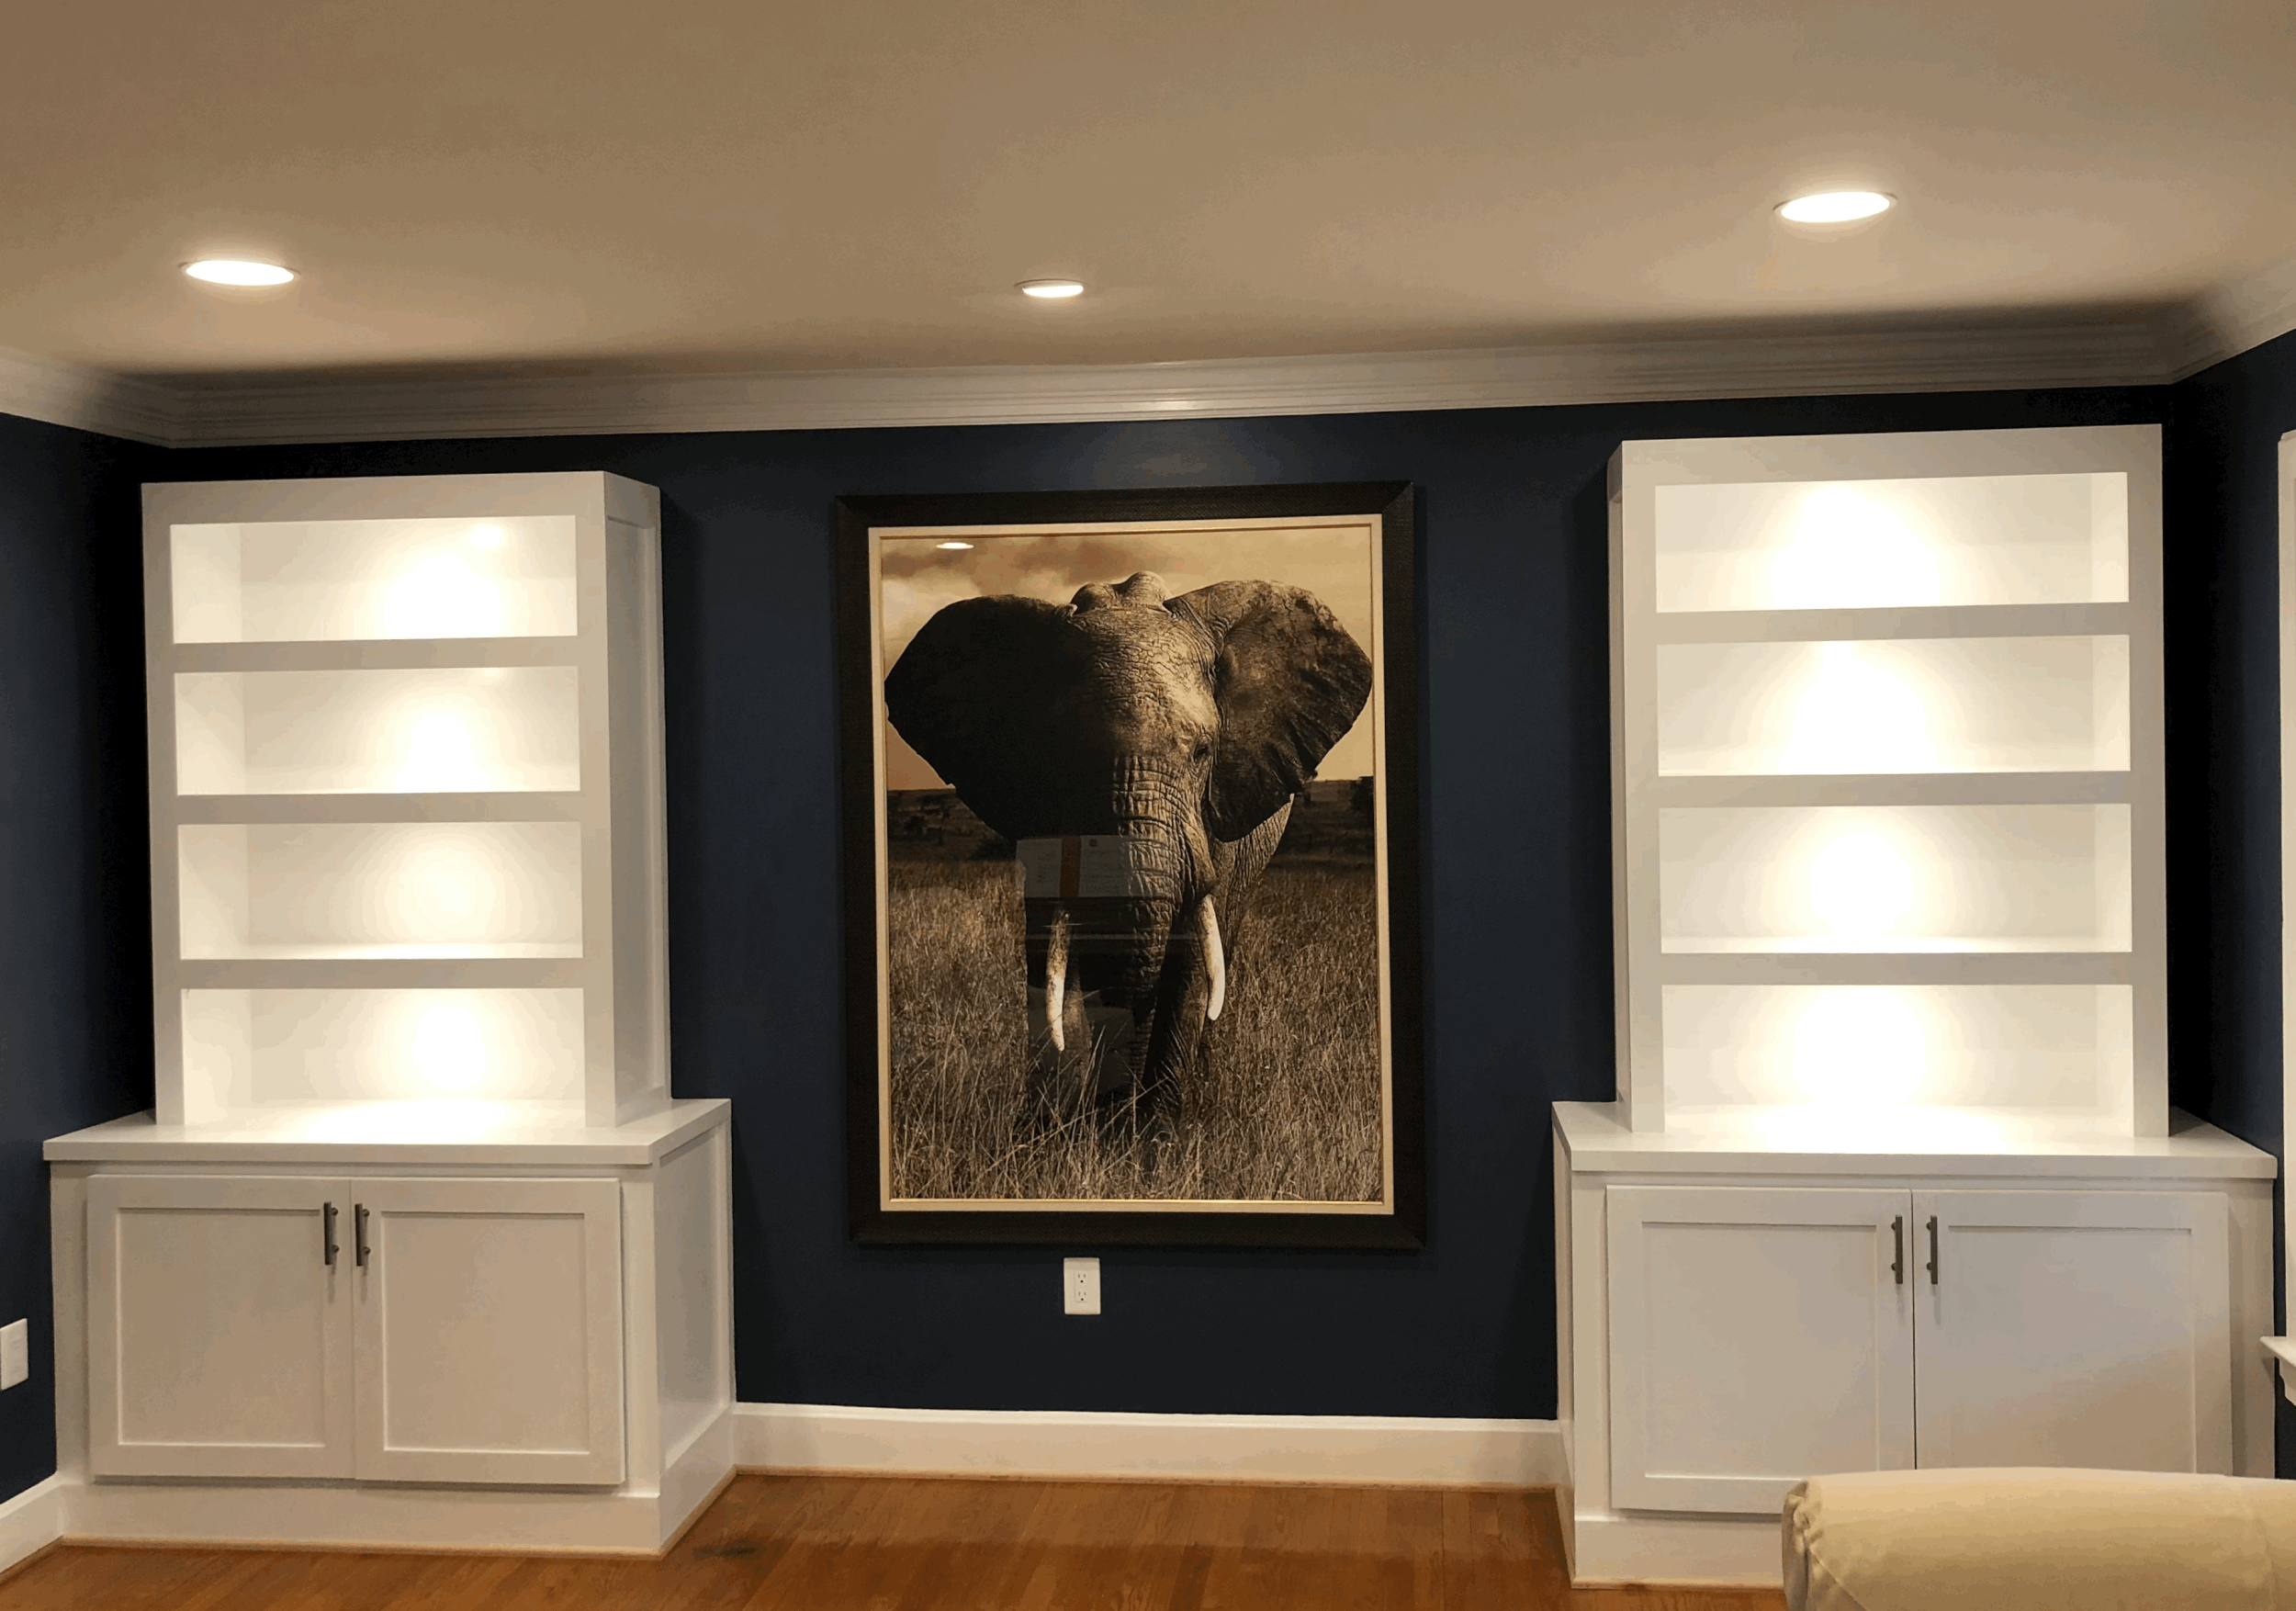 Carpentry, Painting, and Moldings